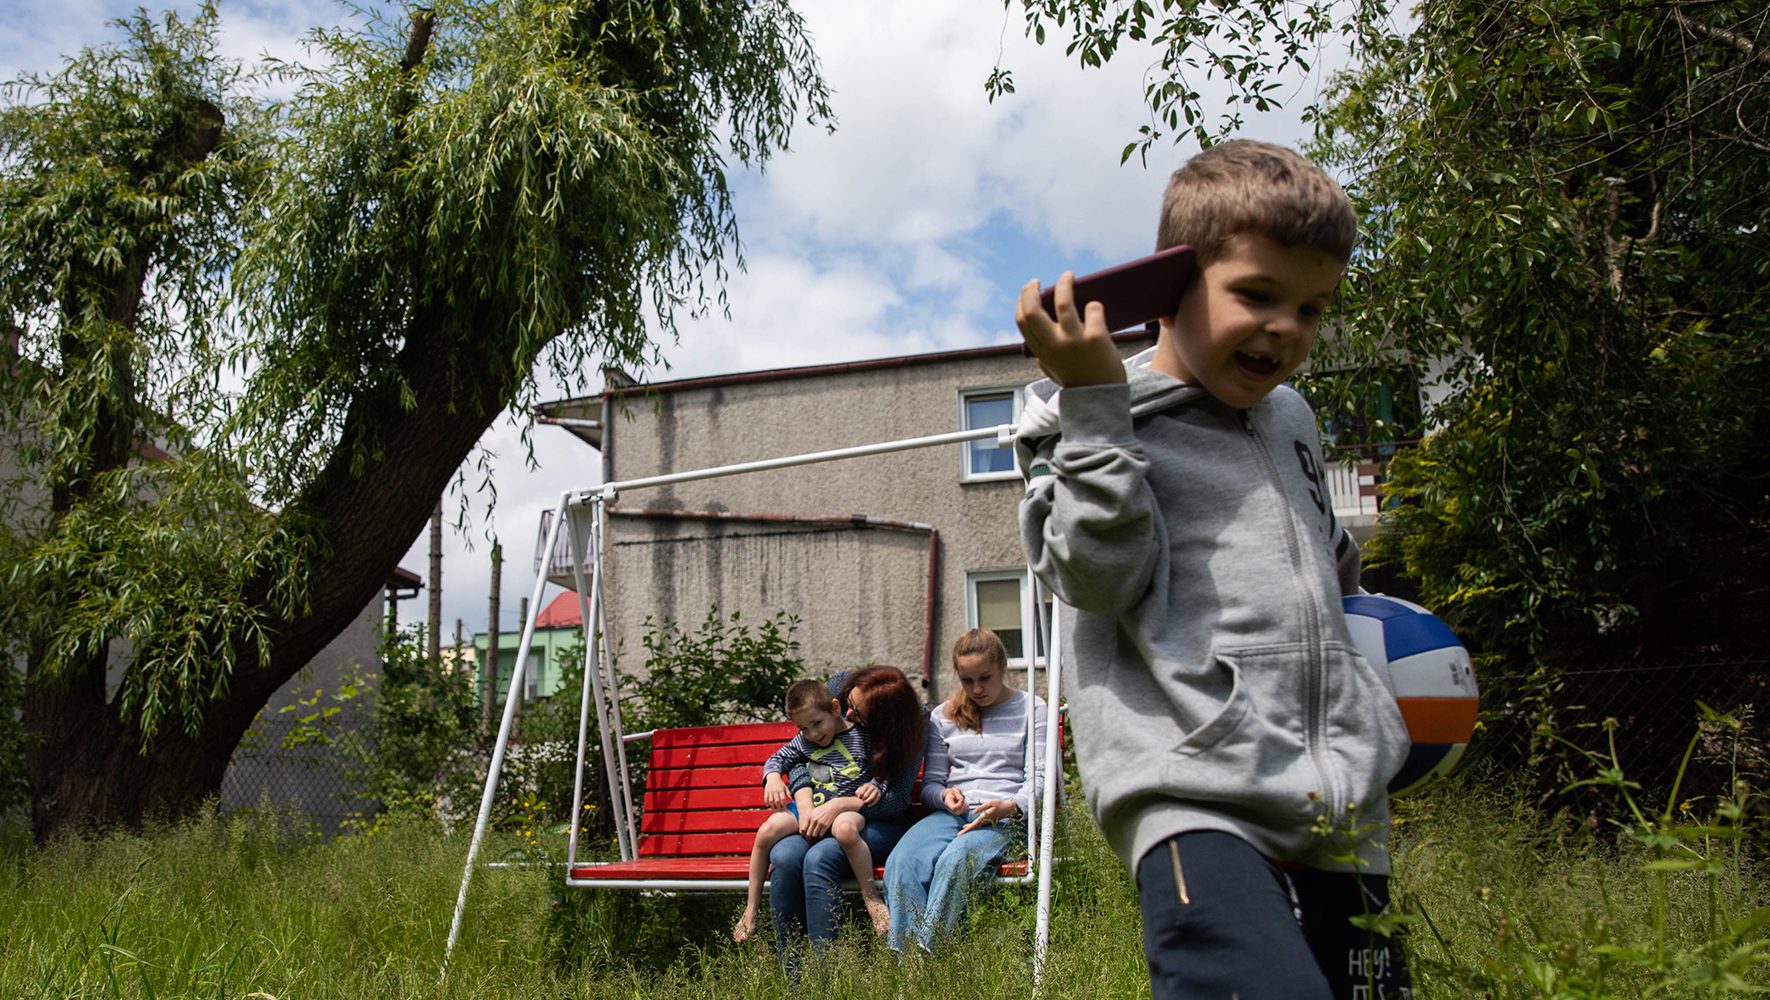 Parents With Disabled Children Find Support from a HIAS Partner in Poland